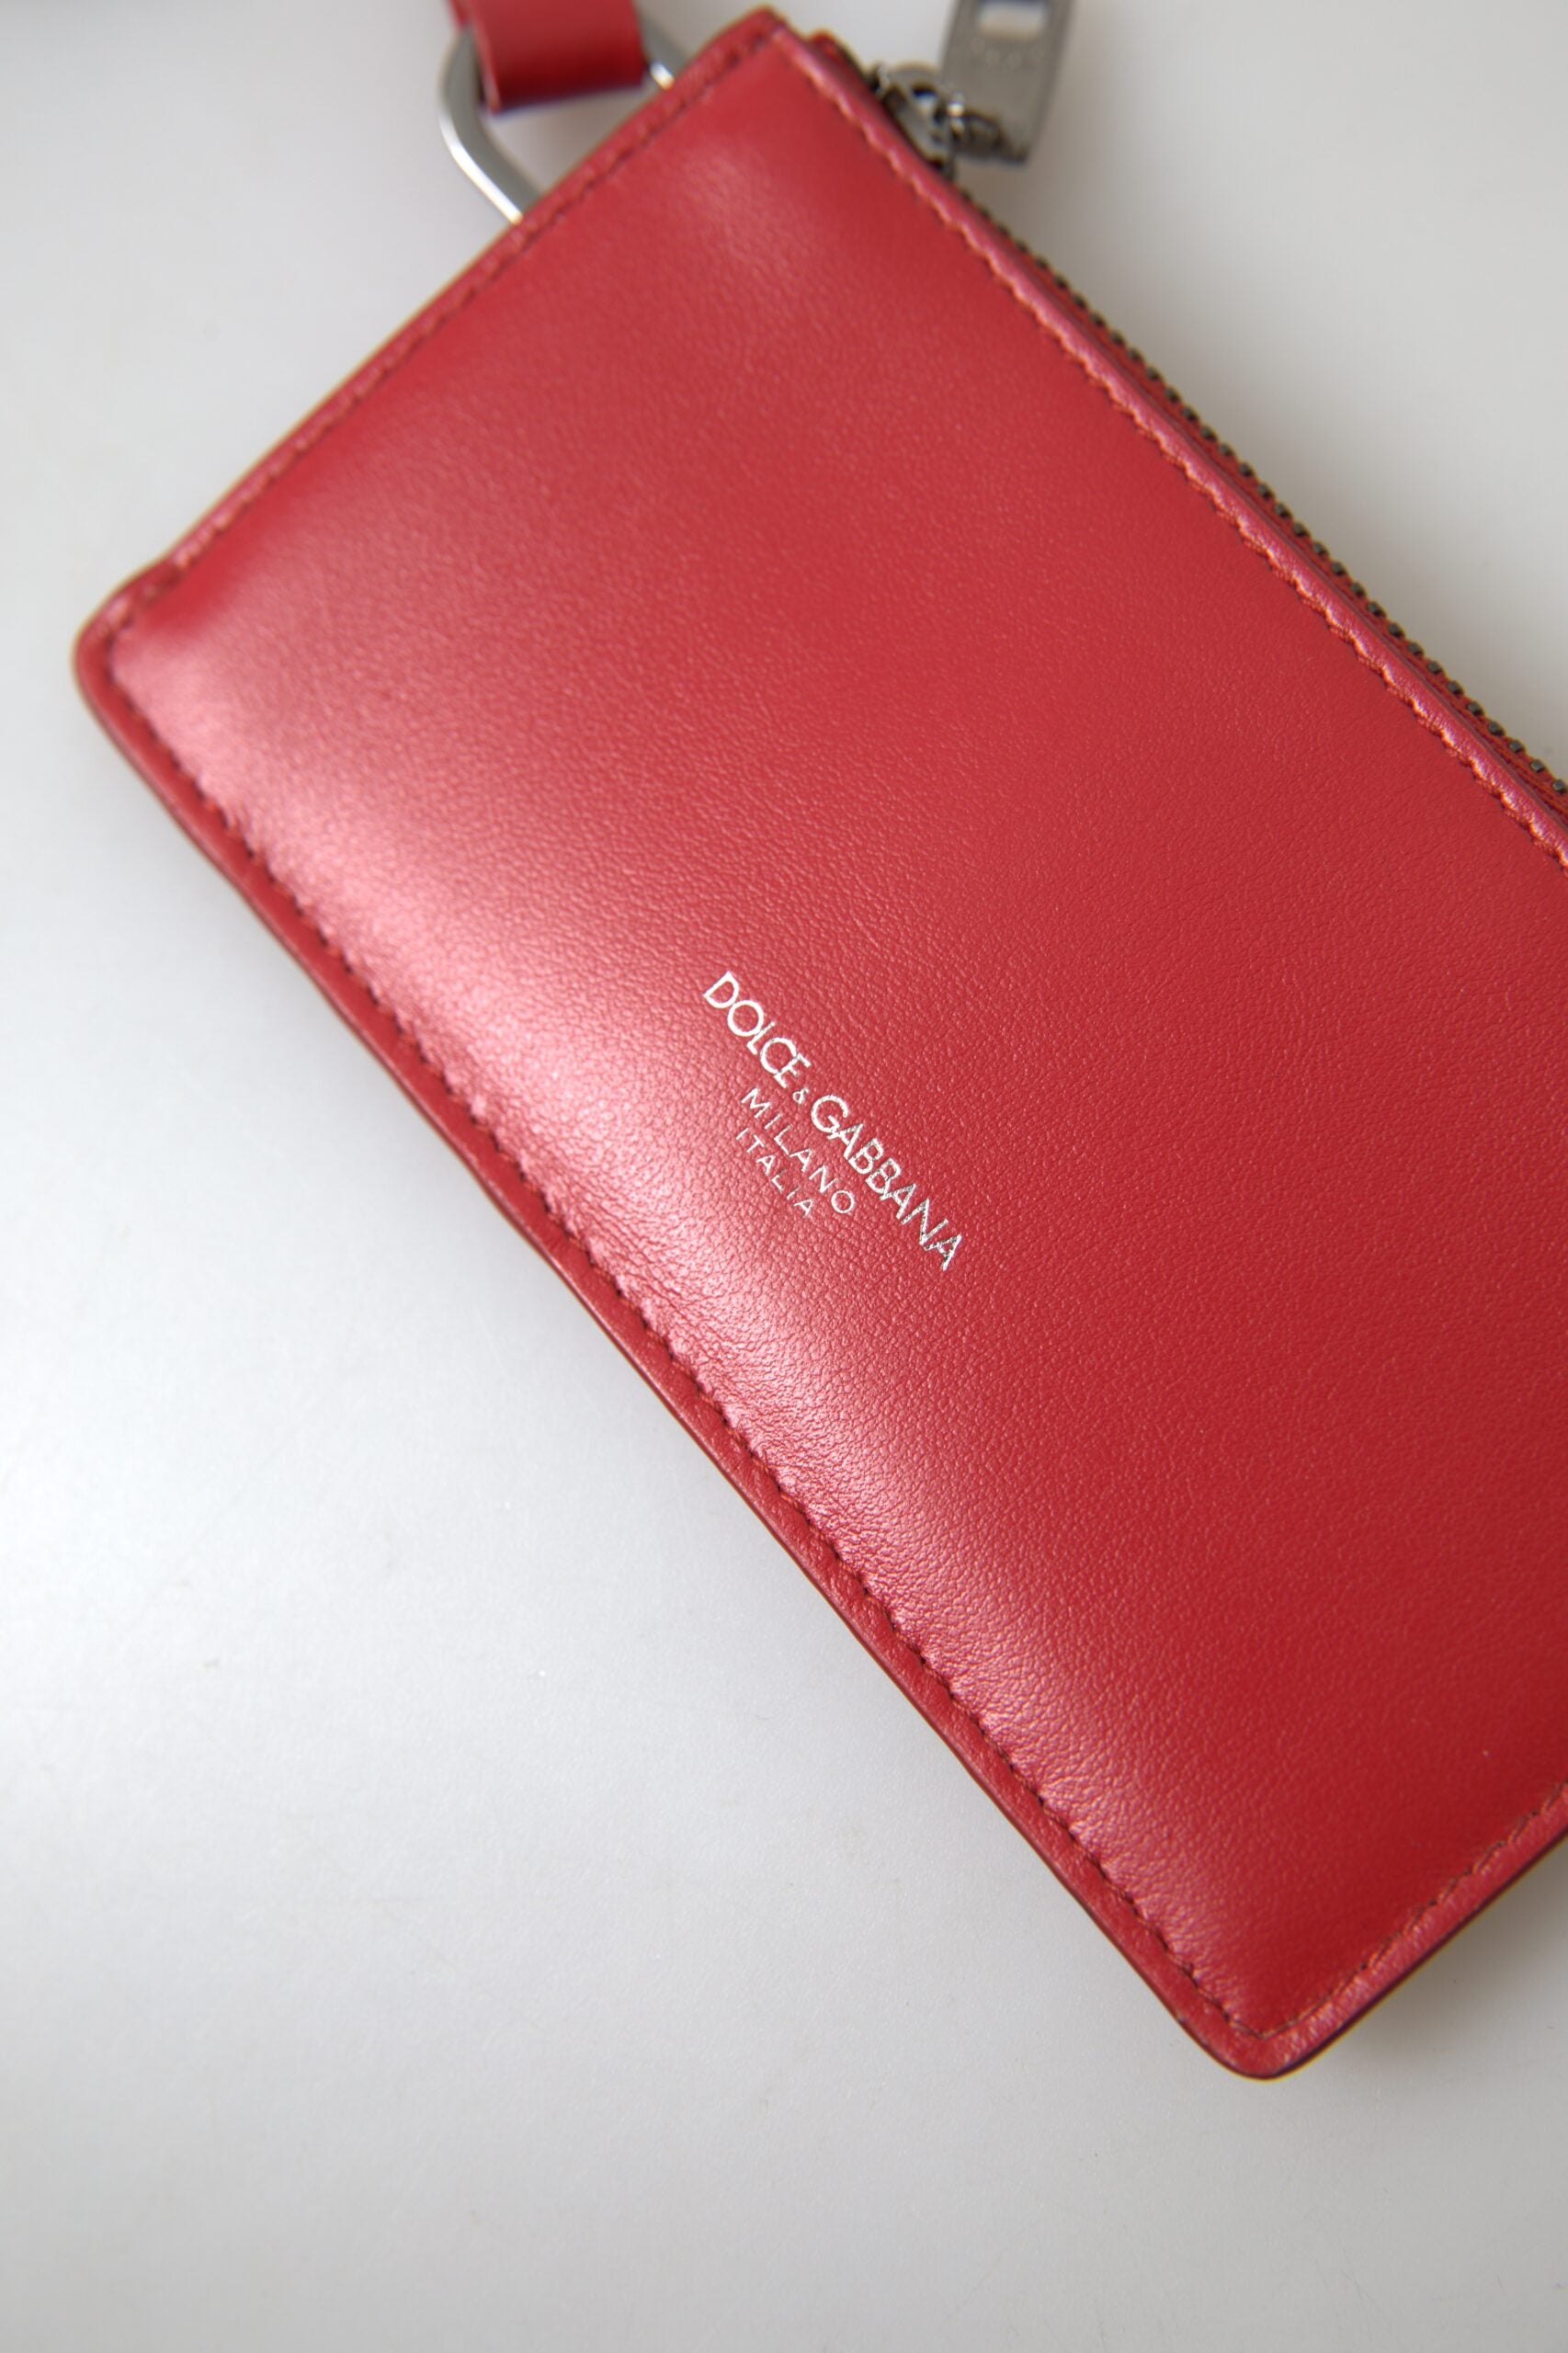 Dolce & Gabbana Chic Red Leather Card Holder Wallet